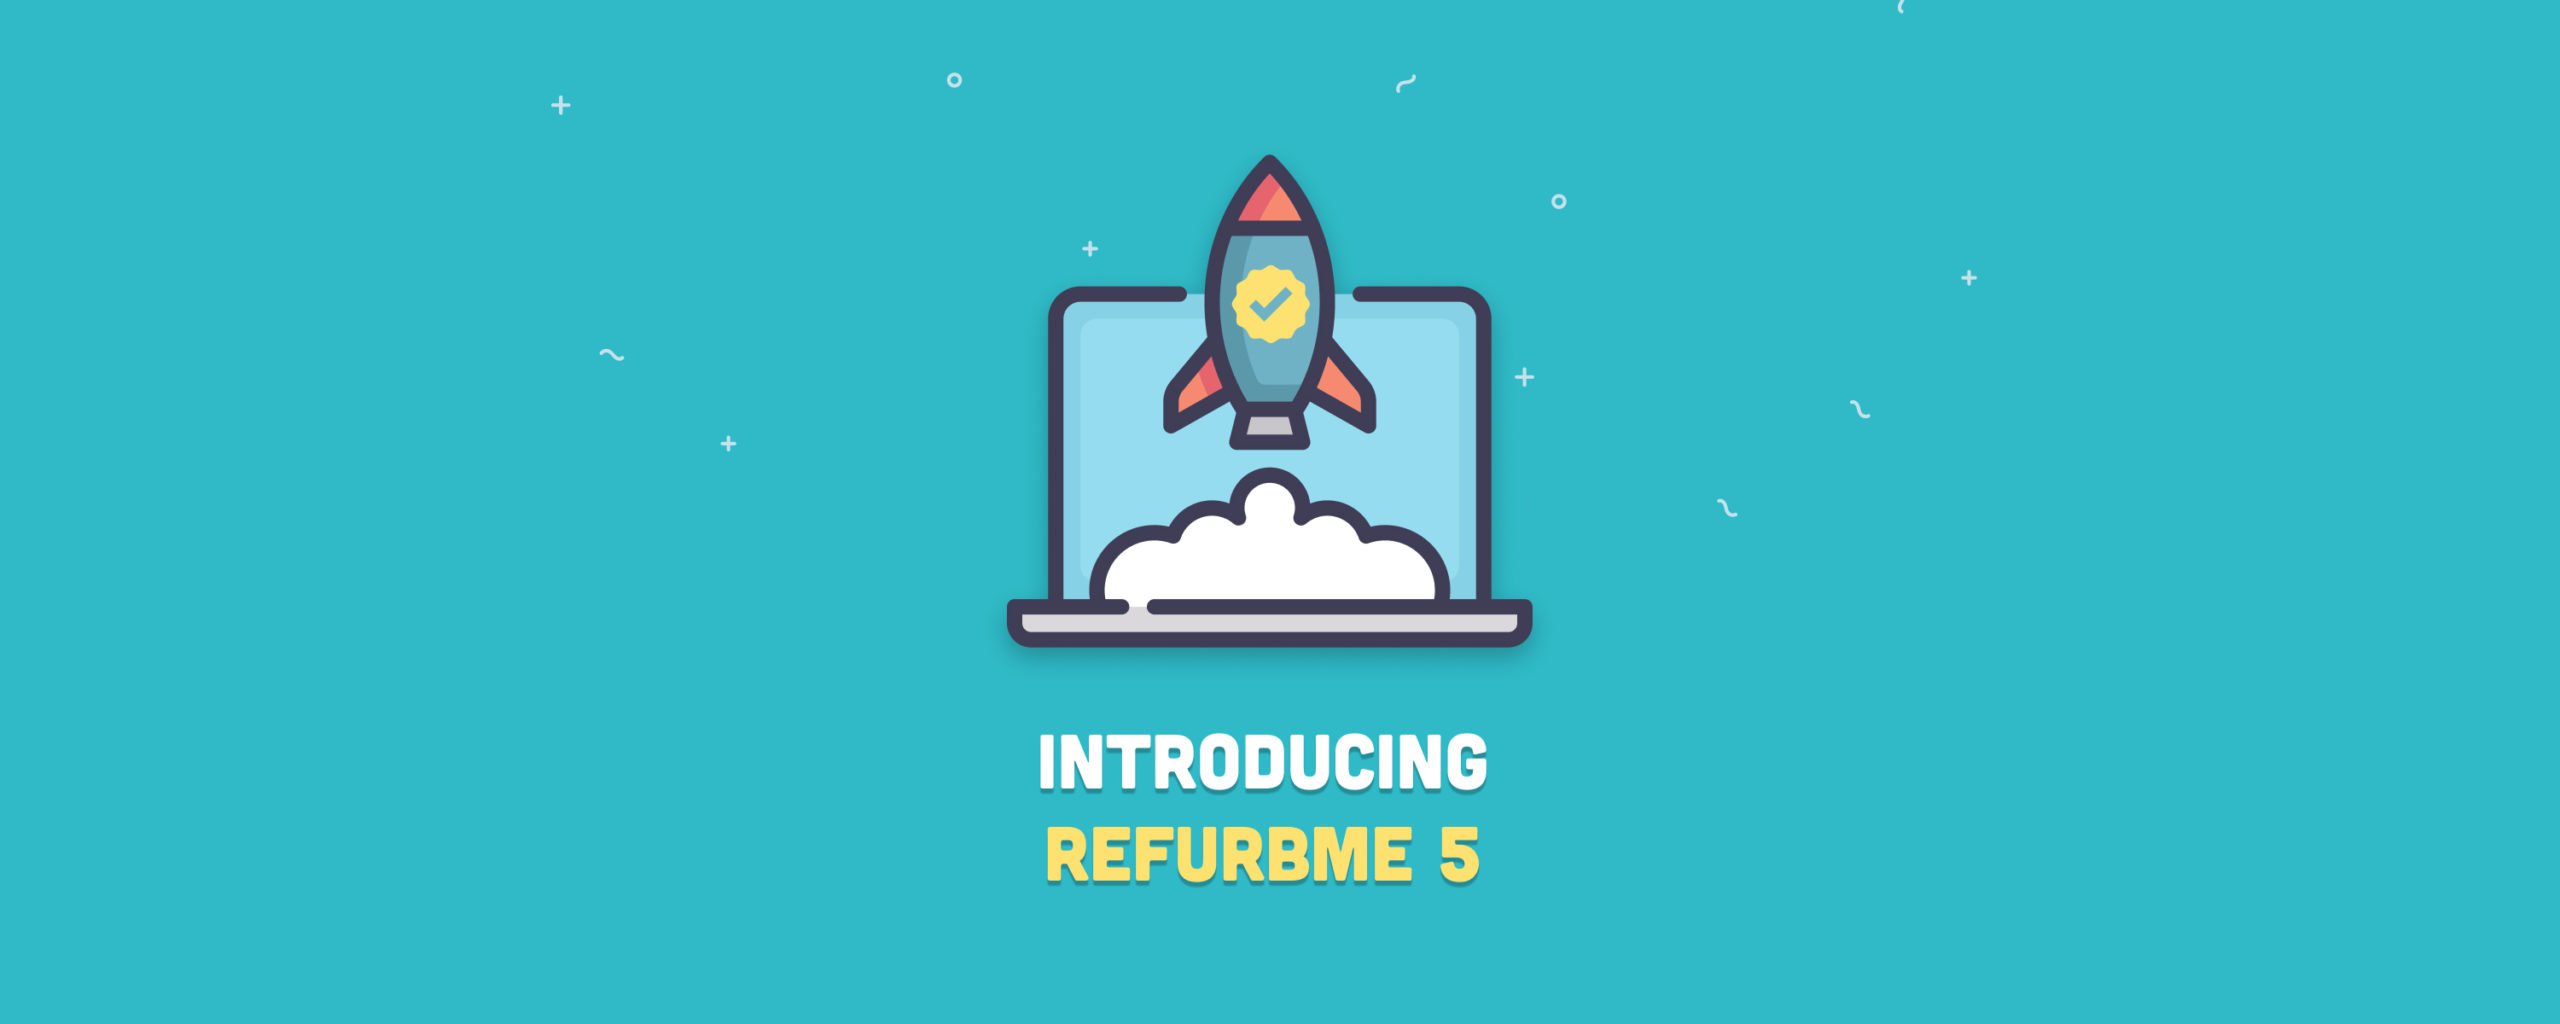 Launching RefurbMe 5: What’s New?